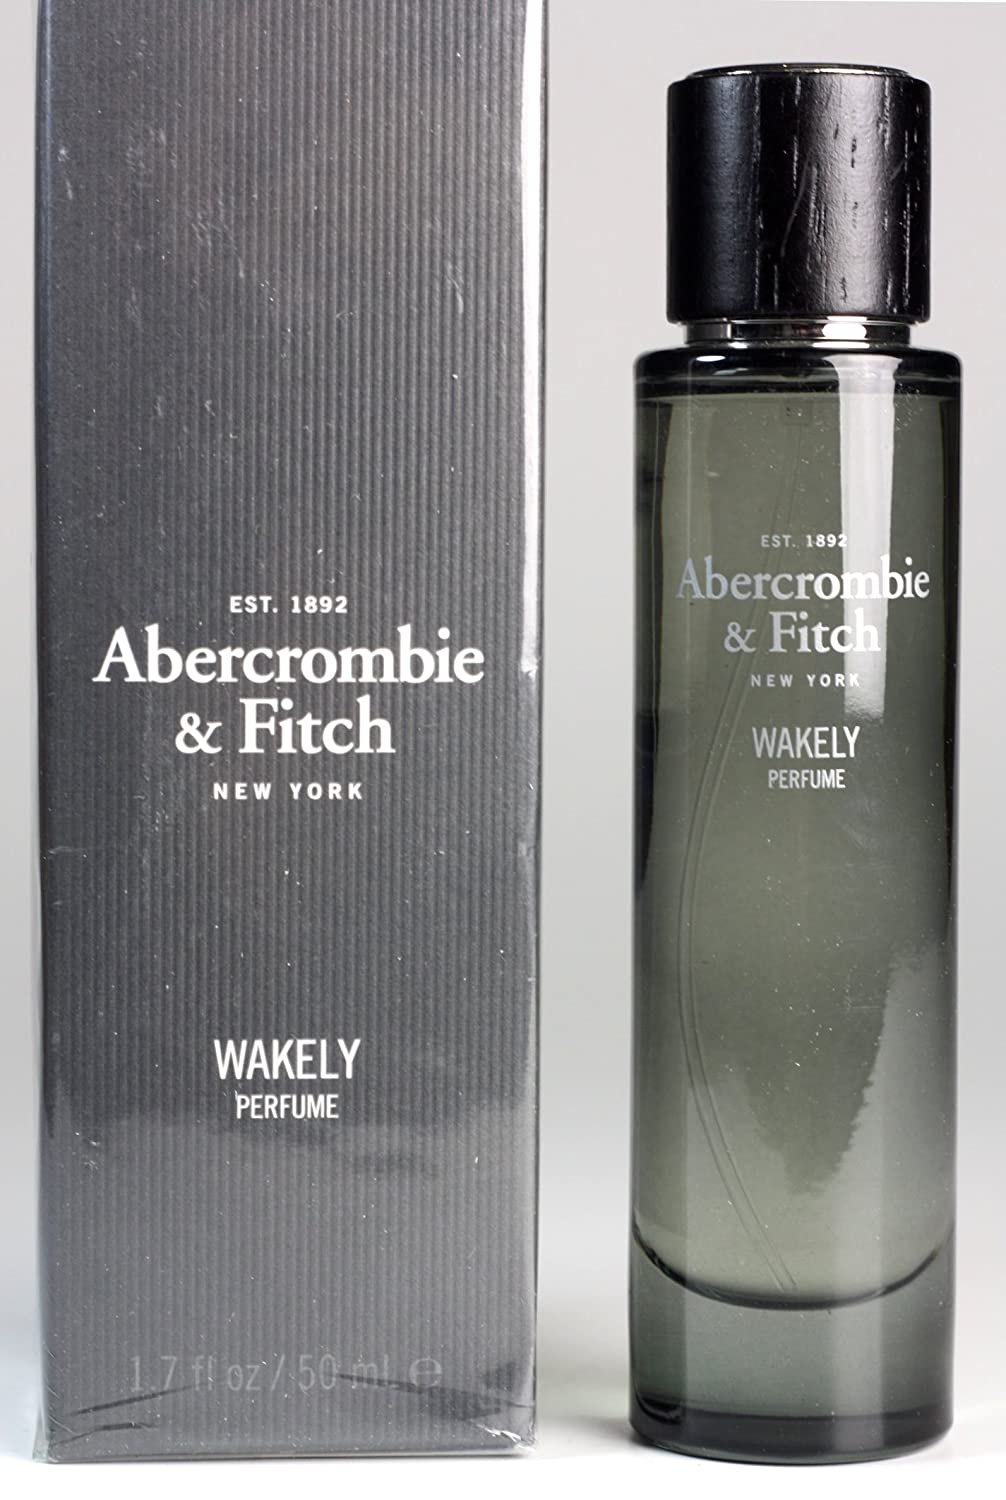 Abercrombie & Fitch Wakely EdP for Women (1x50ml)